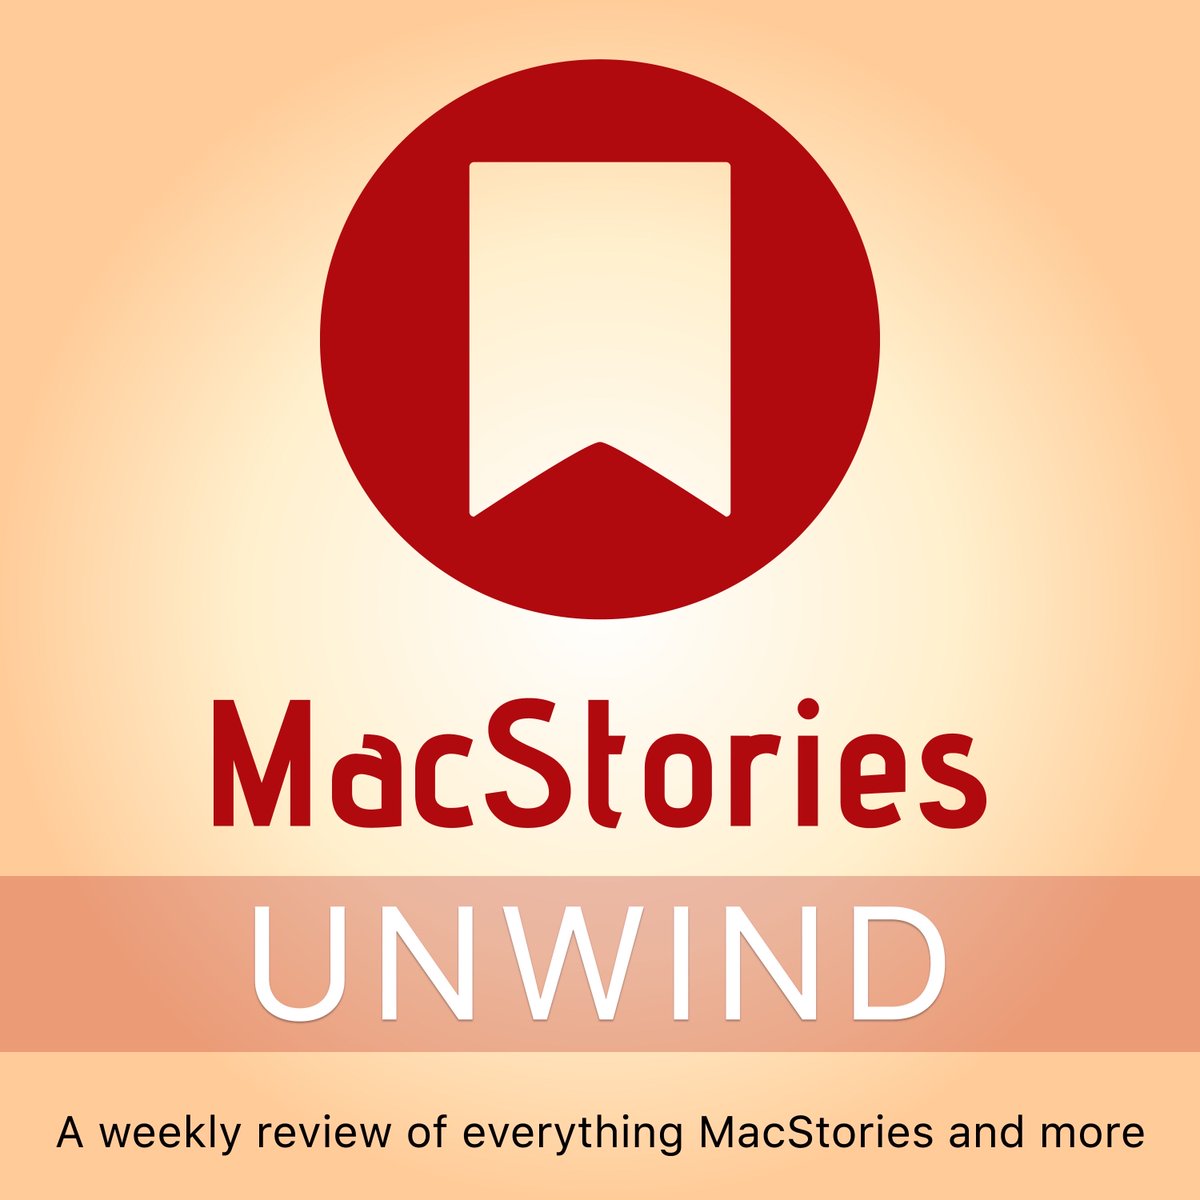 Our Best TV Shows and Movies of 2022 episode of MacStories Unwind is out and includes bonus recommendations from the TV and Movies channel of the @ClubMacStories Discord. macstories.net/news/macstorie… Learn more about Club MacStories here: club.macstories.net/plans